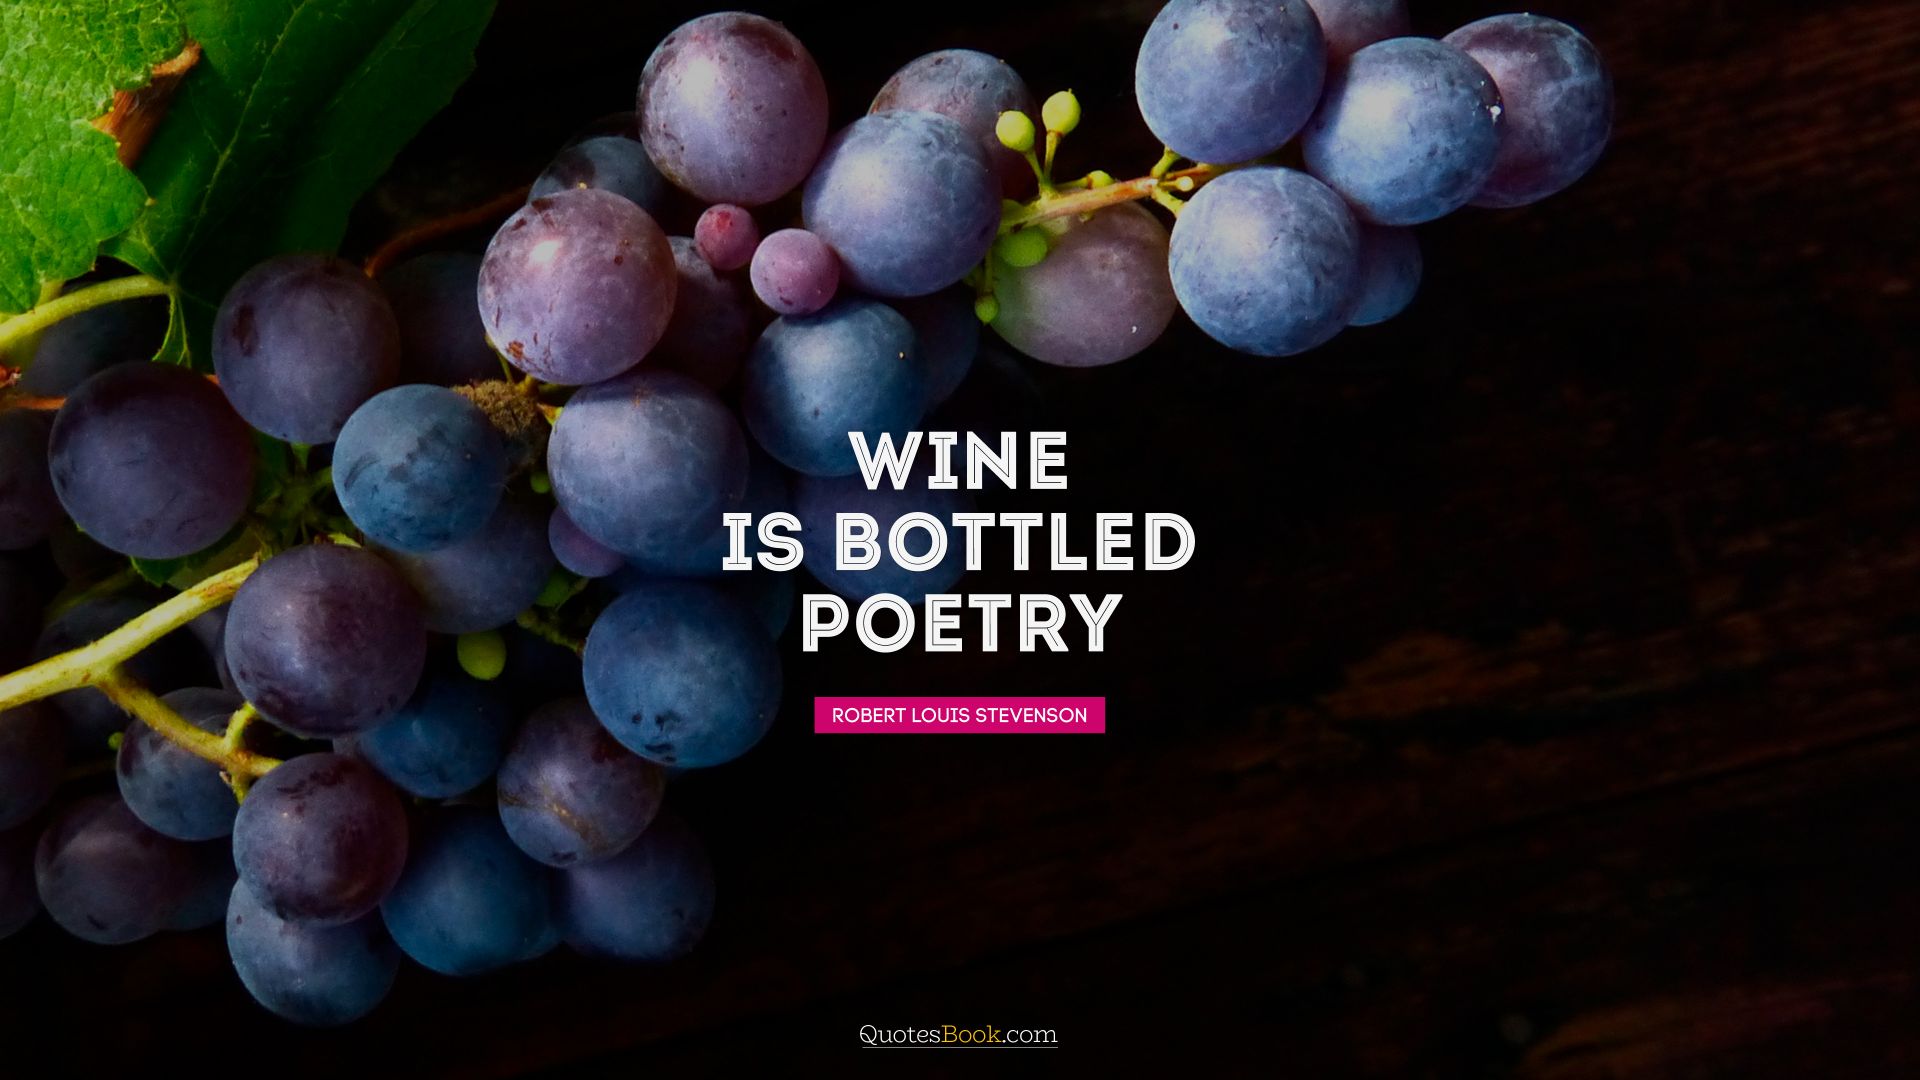 Wine is bottled poetry. - Quote by Robert Louis Stevenson